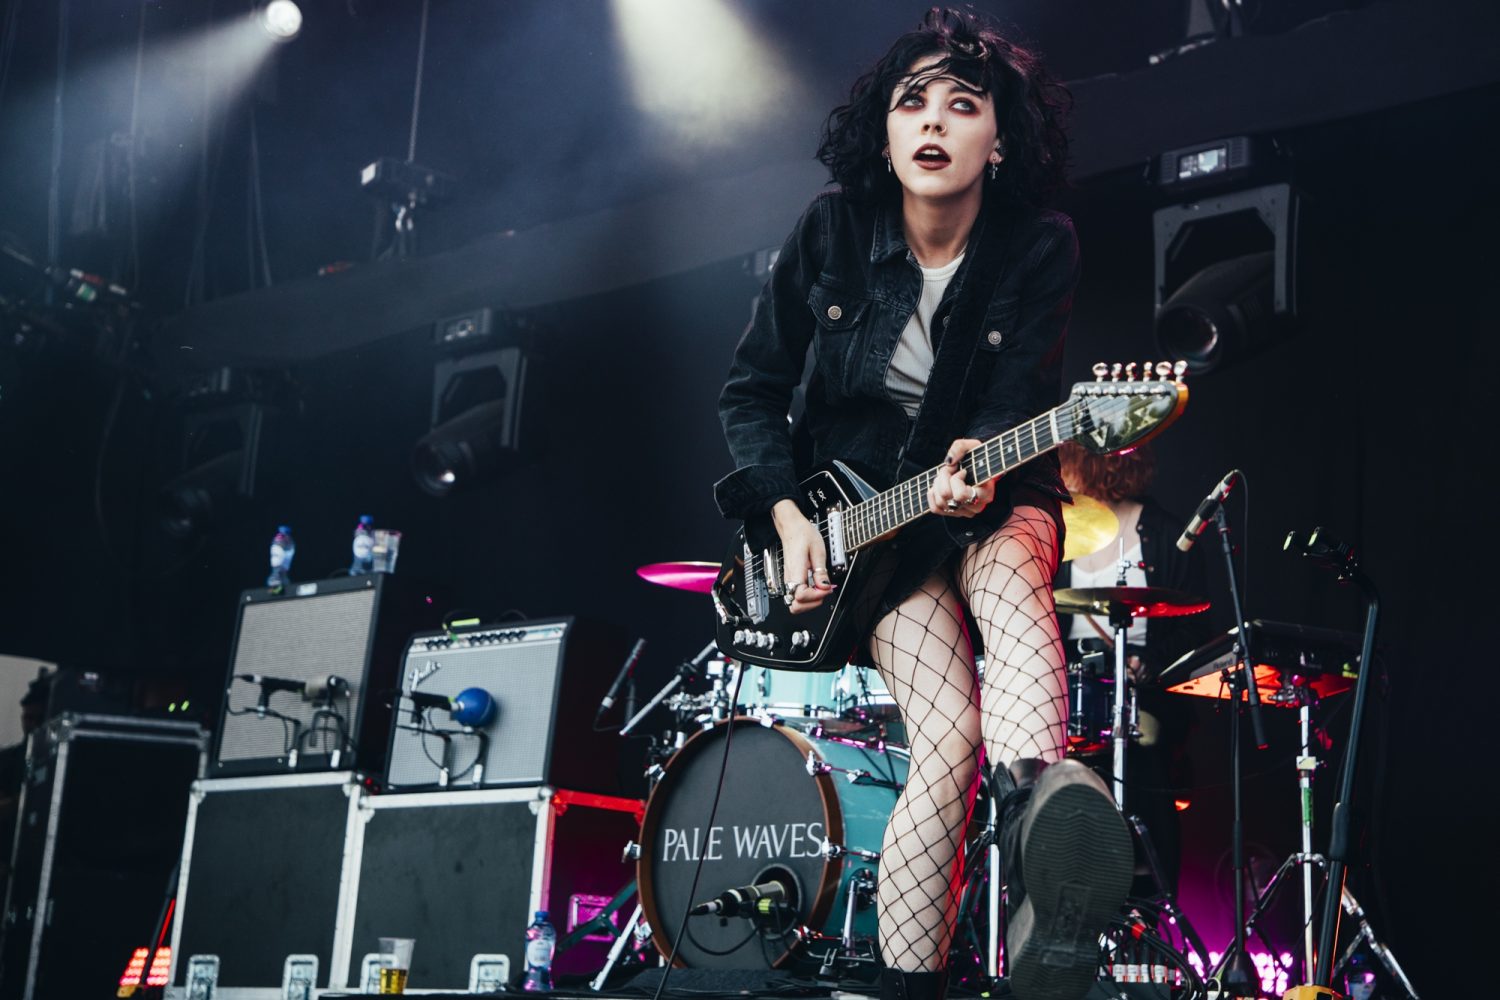 Here's another new 'un from Pale Waves - check out 'One More Time' | Dork